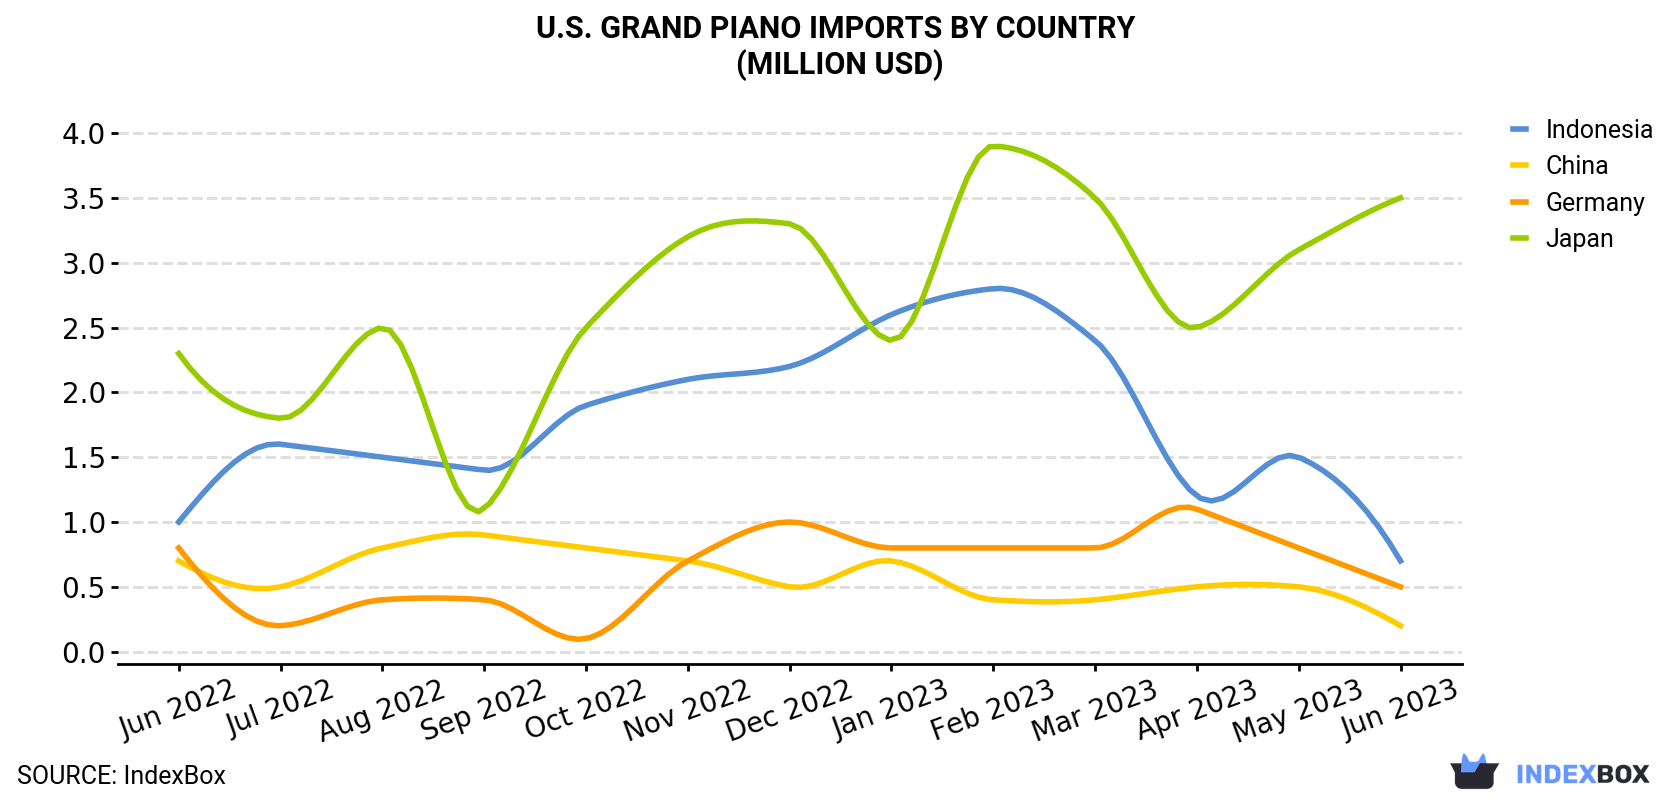 U.S. Grand Piano Imports By Country (Million USD)